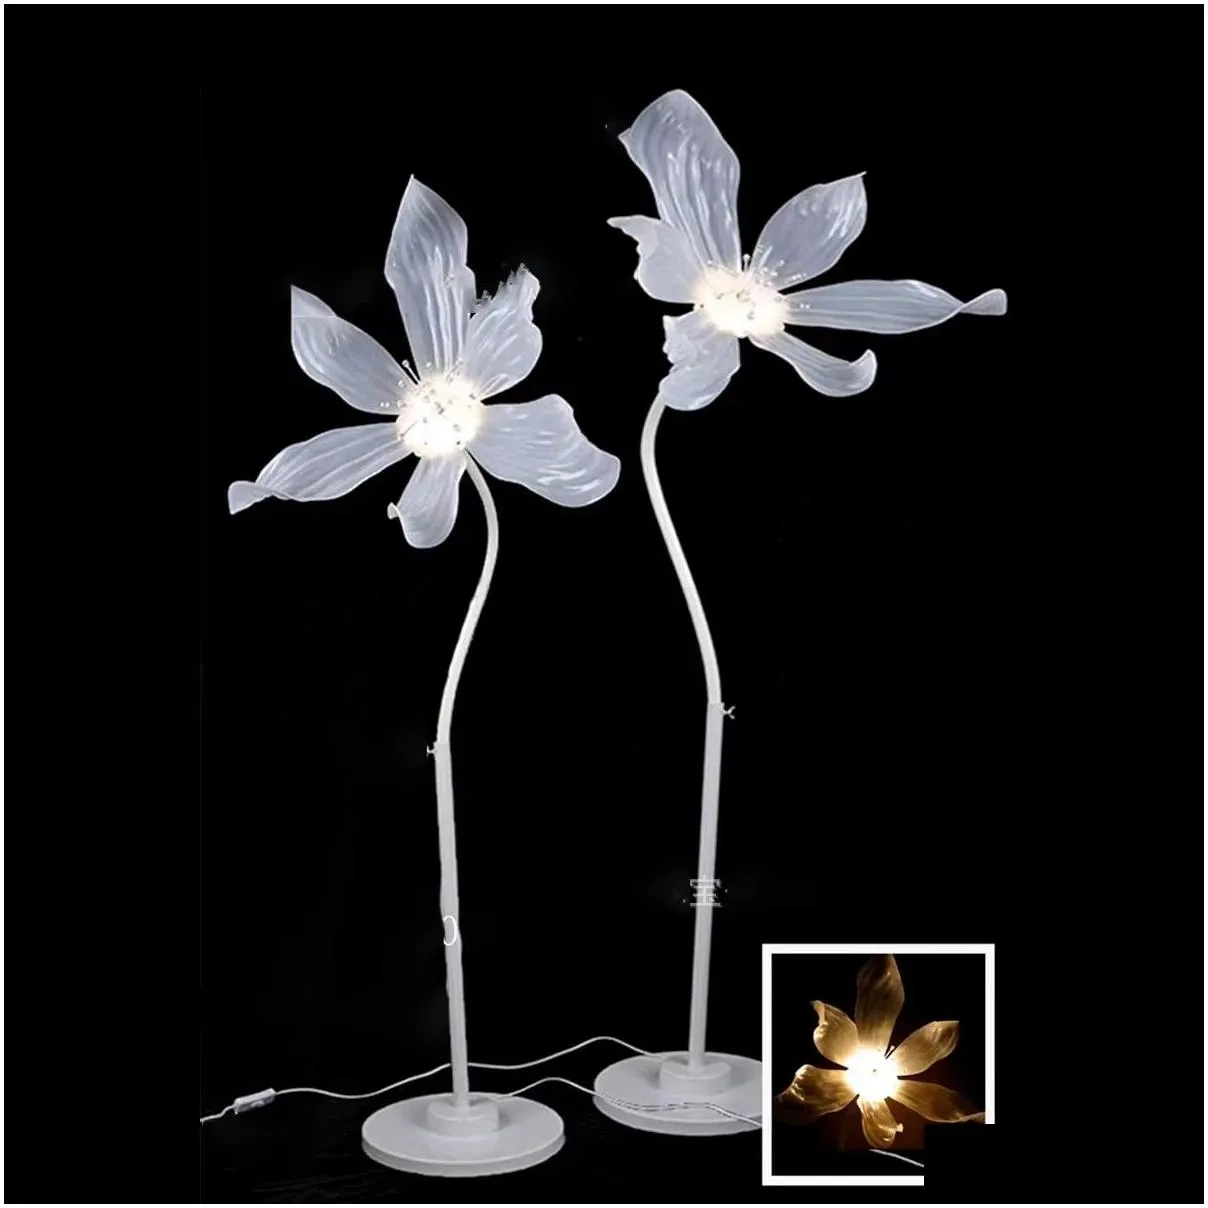 many -head metal gold candlestick ac powered led light source for wedding sta decoration table centerpiece walkway pillar